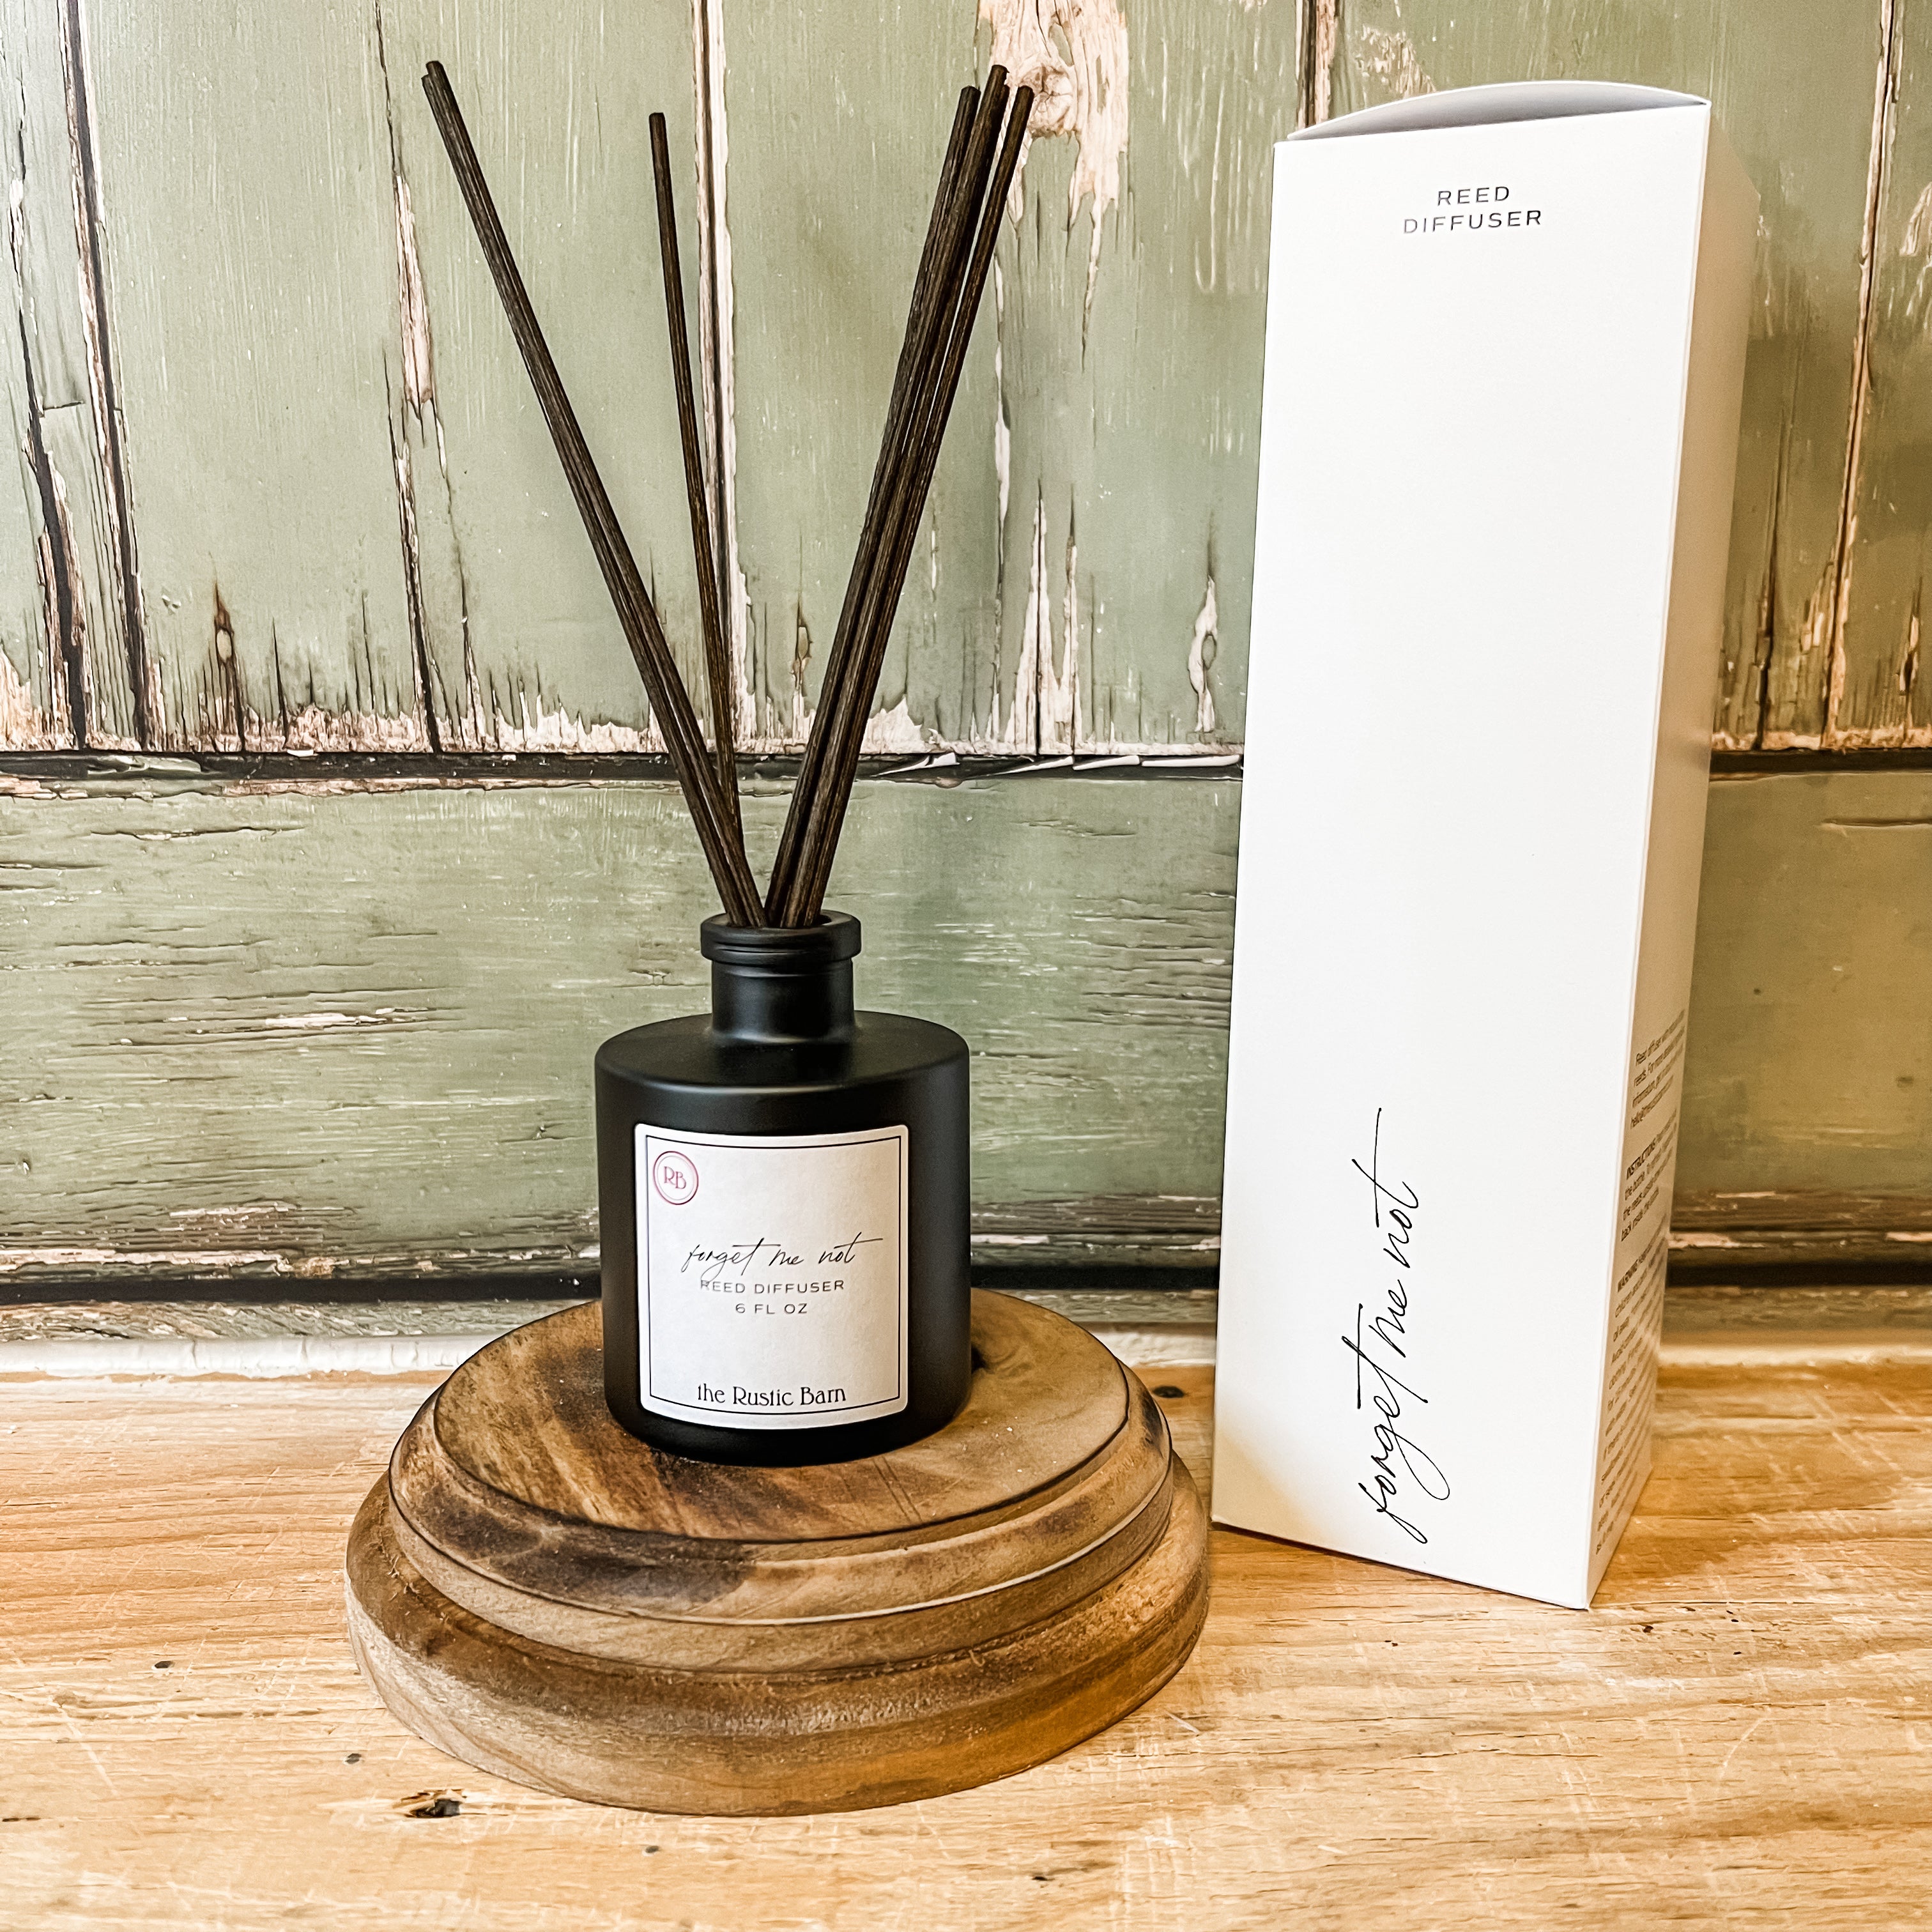 Handmade reed diffuser with essential oils the rustic barn ct